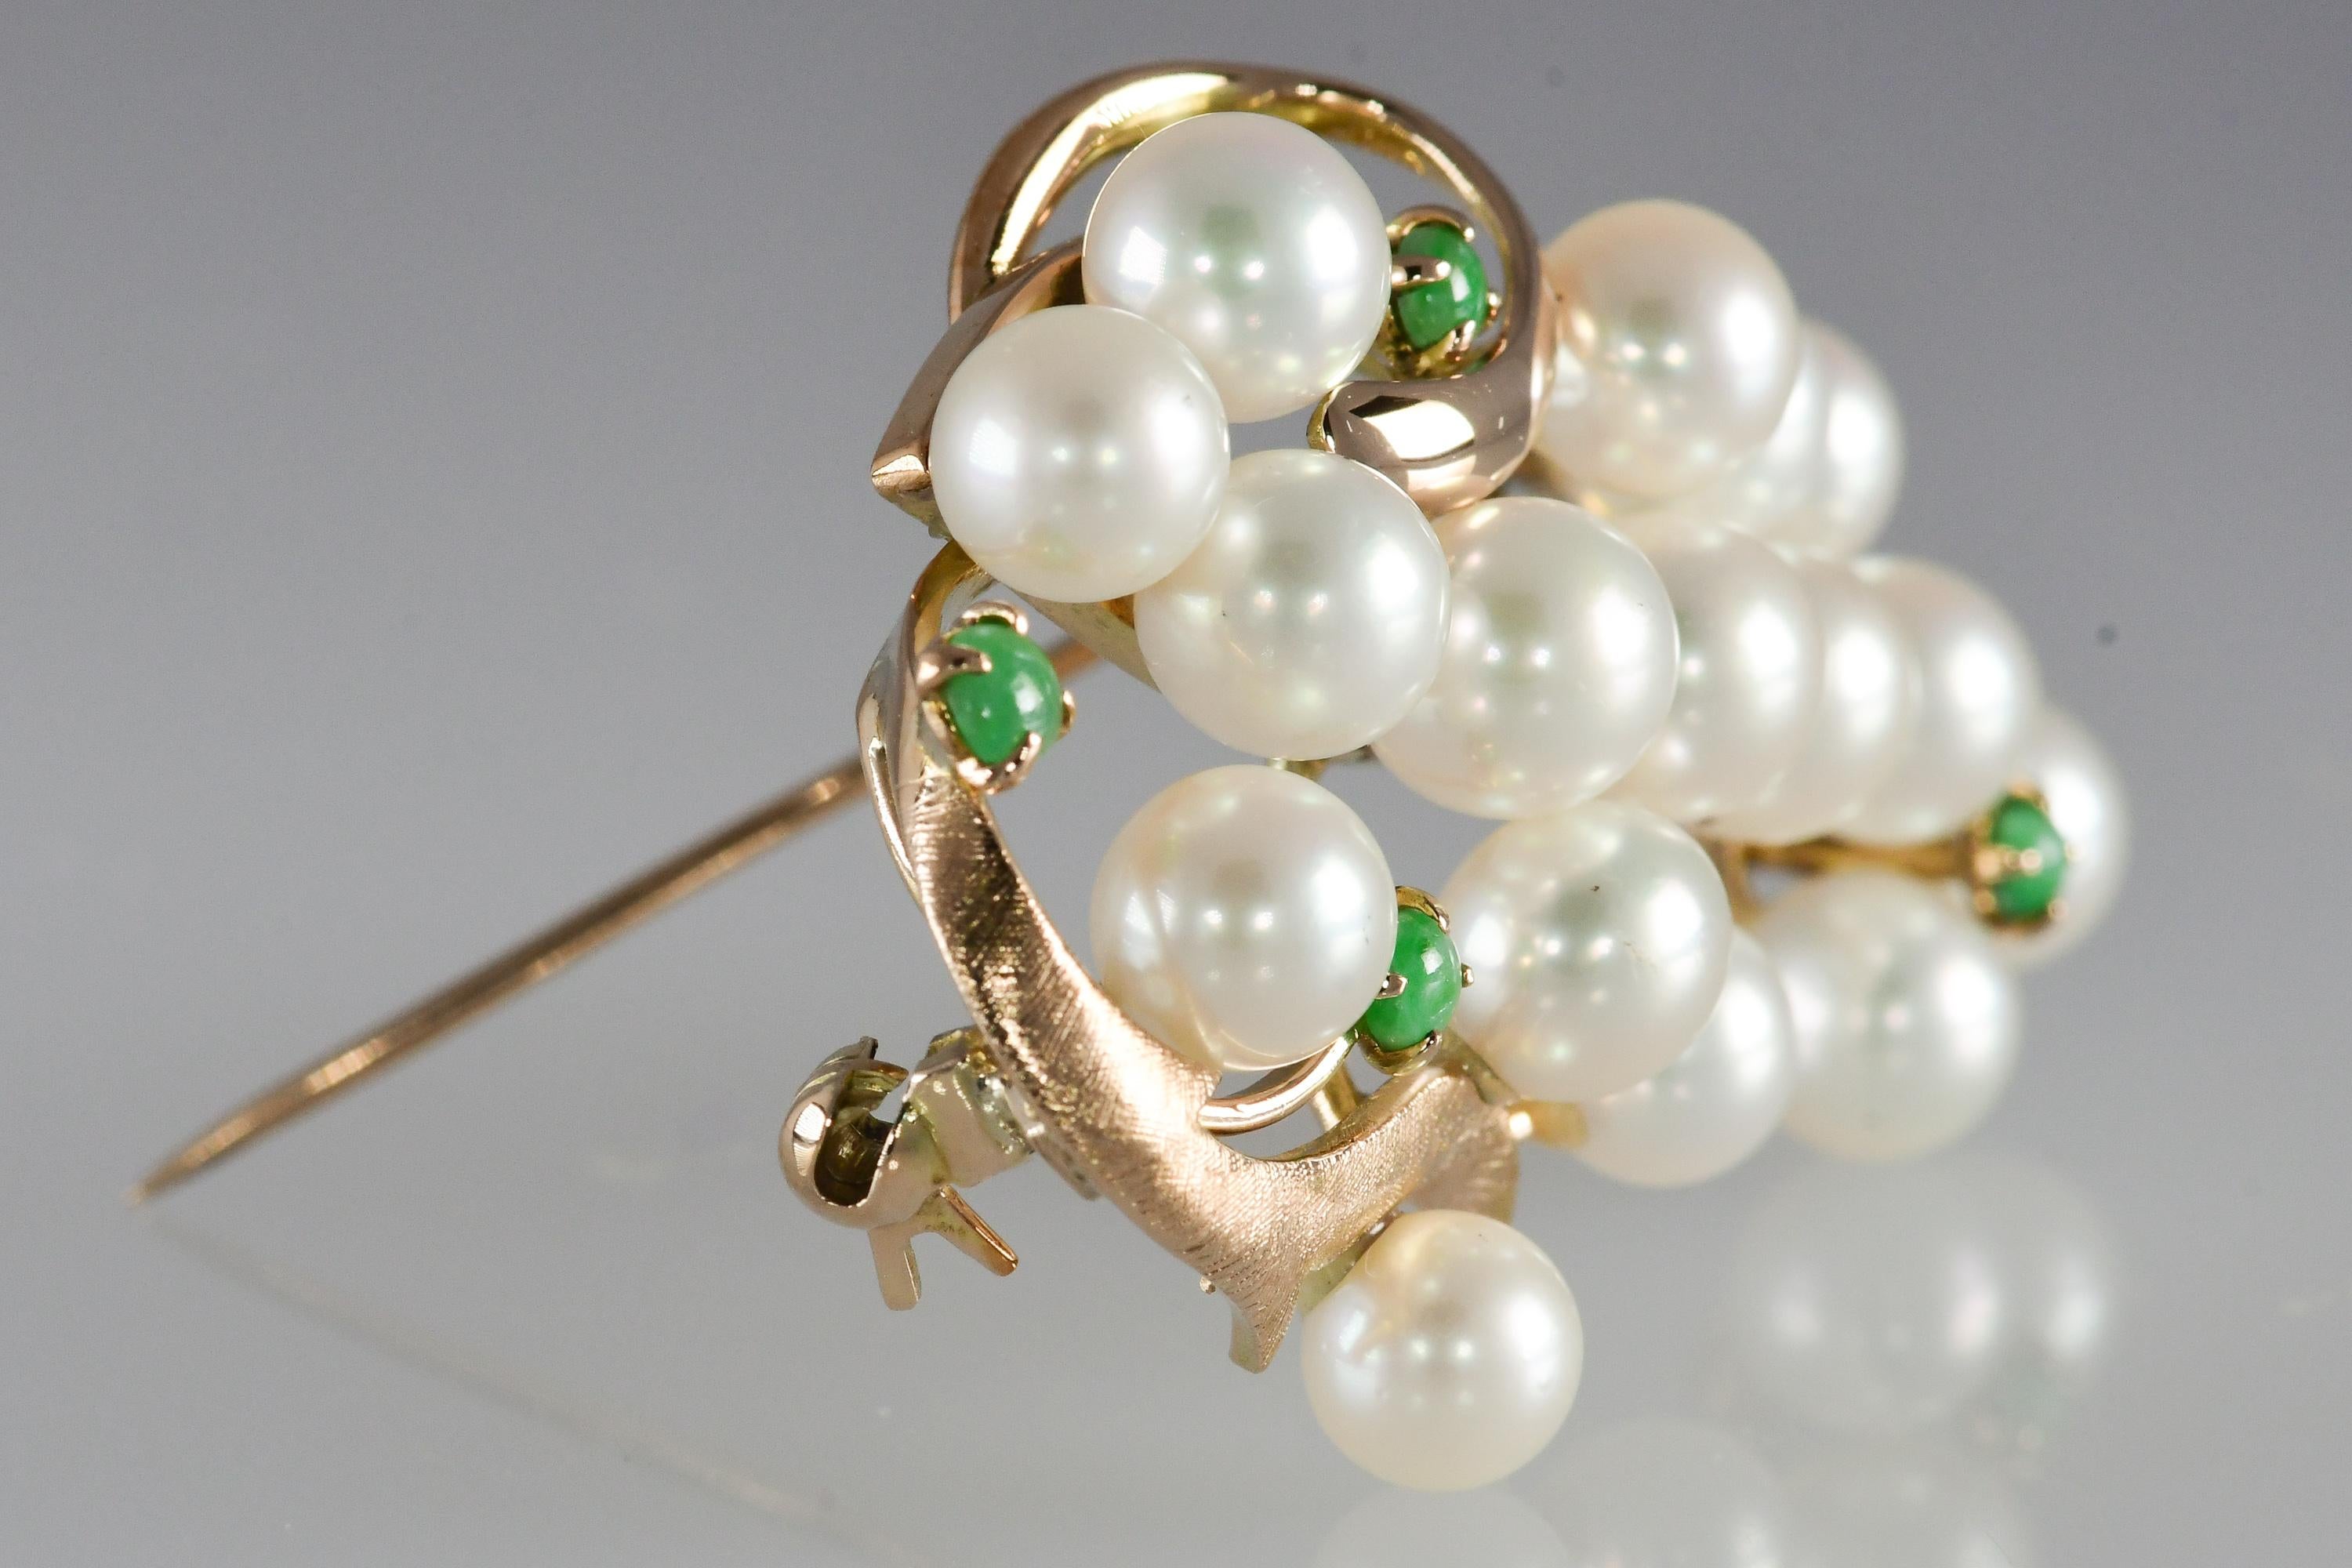 Contemporary Vintage Akoya Pearl Brooch with Jade Accents 14 Karat Yellow Gold 11.5 Grams